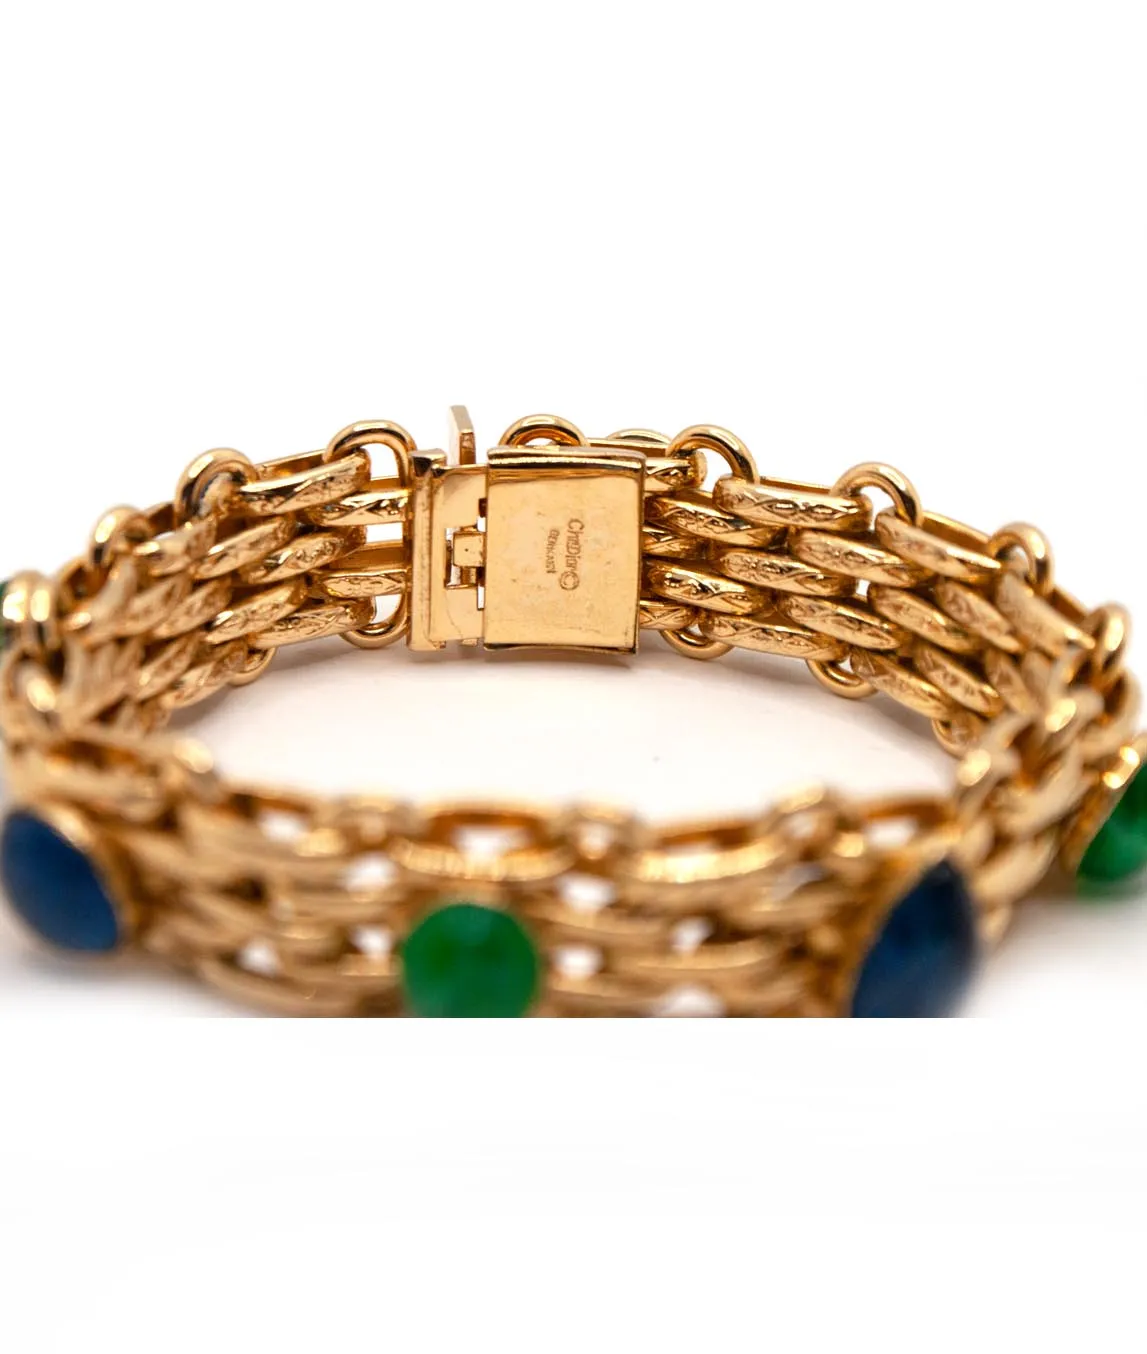 Gold-plated link bracelet by Christian Dior done up photo showing interior